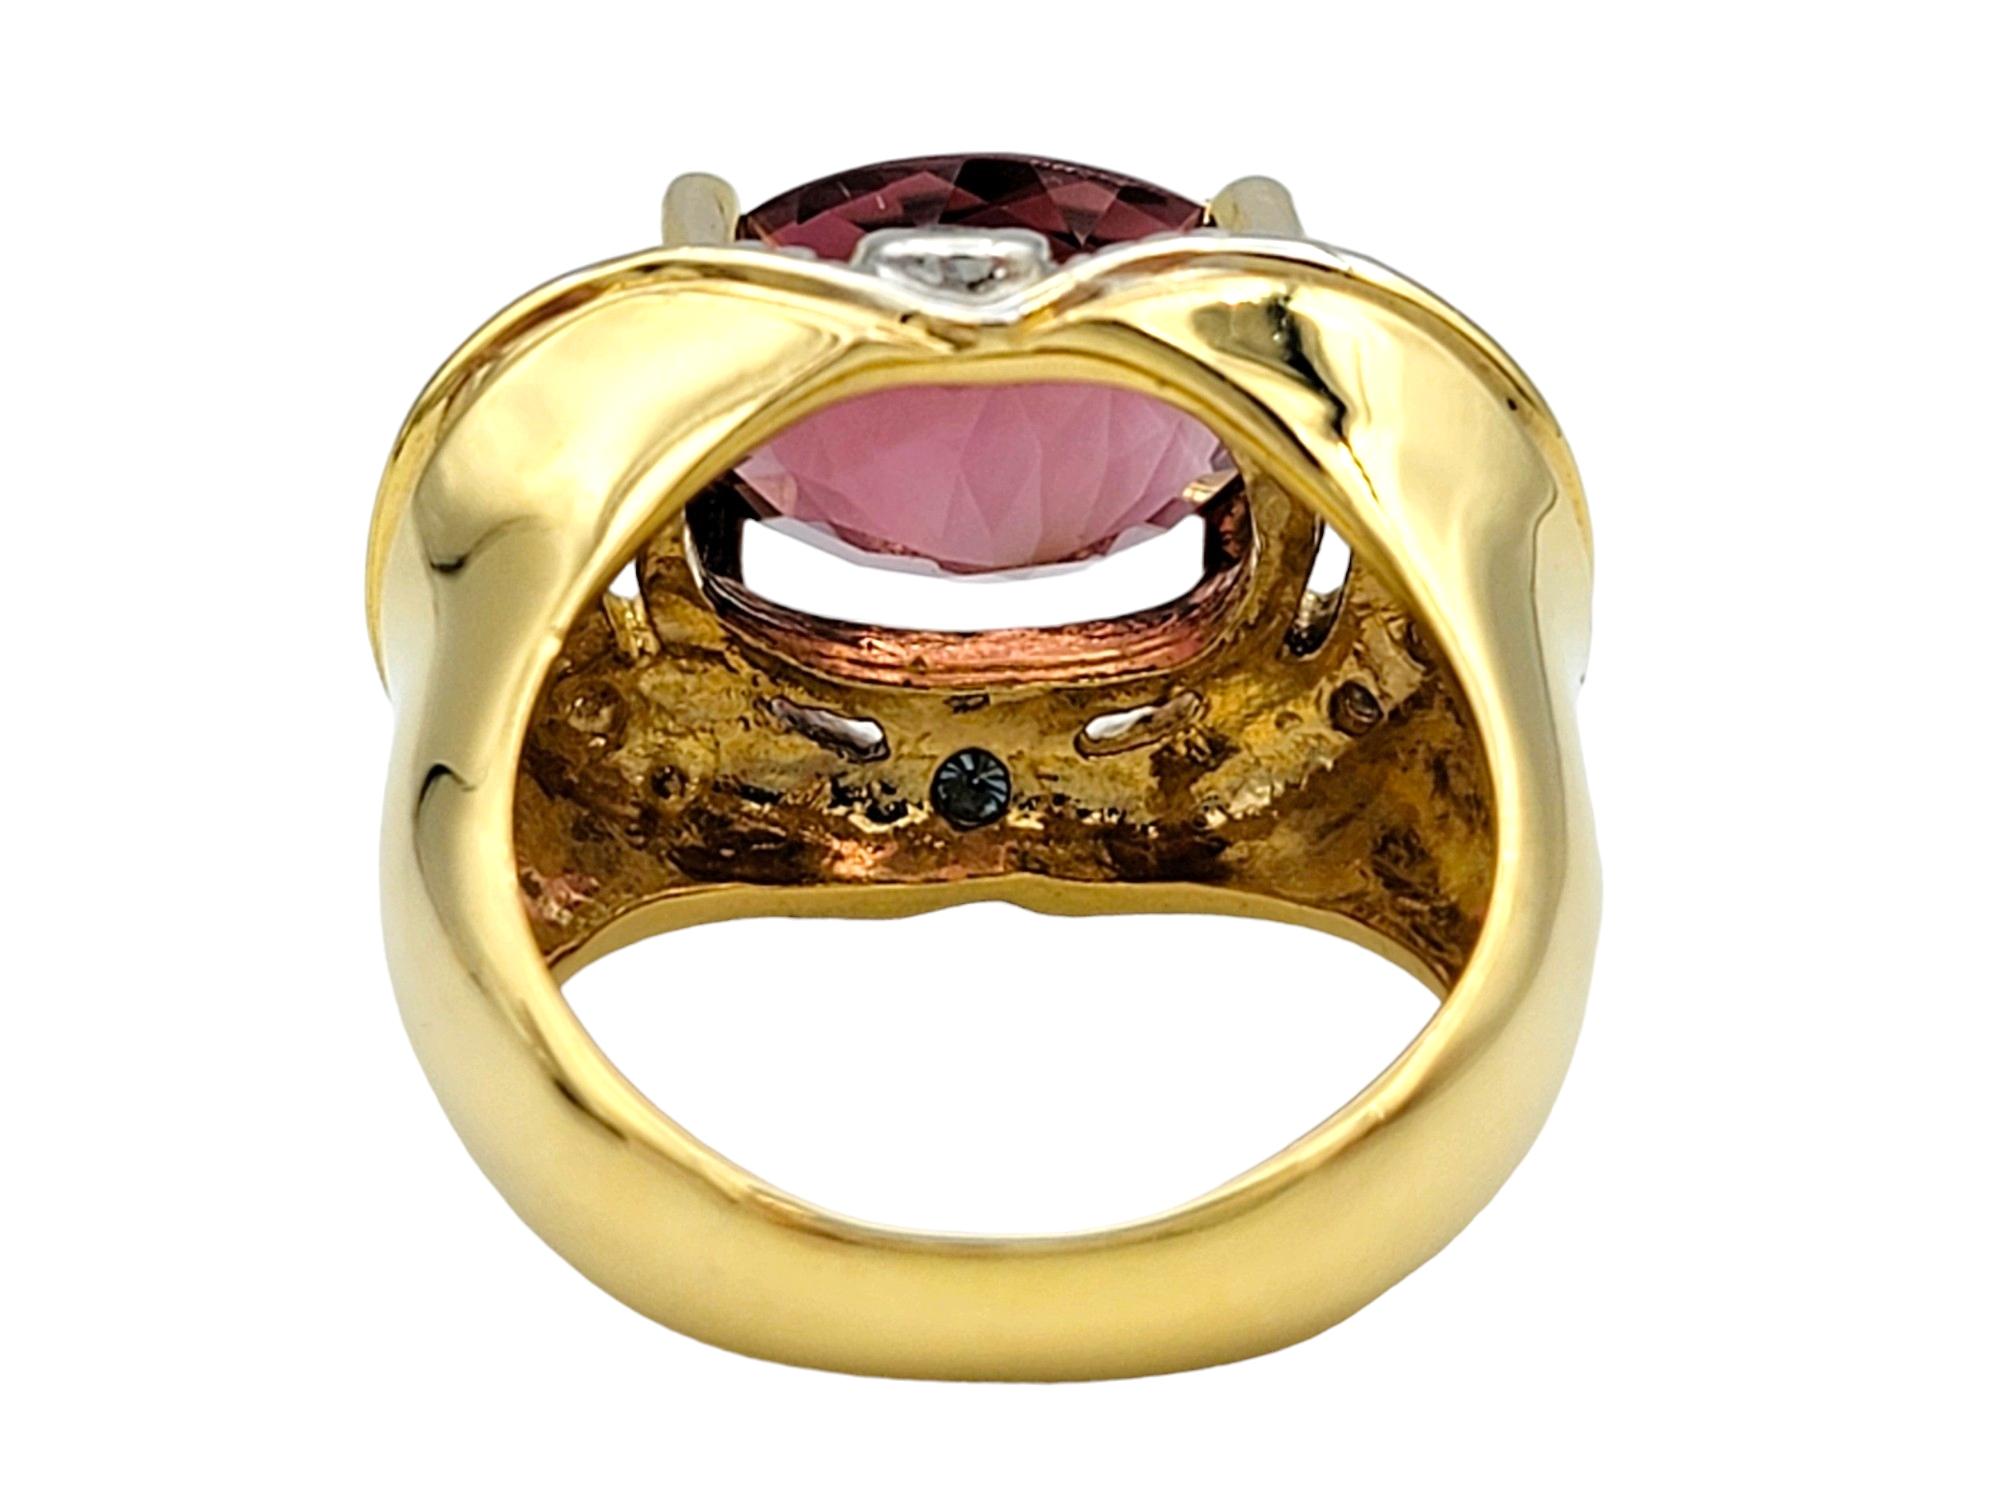 Oval Pink Tourmaline and Diamond Halo Ring Set in 14 Karat White and Yellow Gold For Sale 1